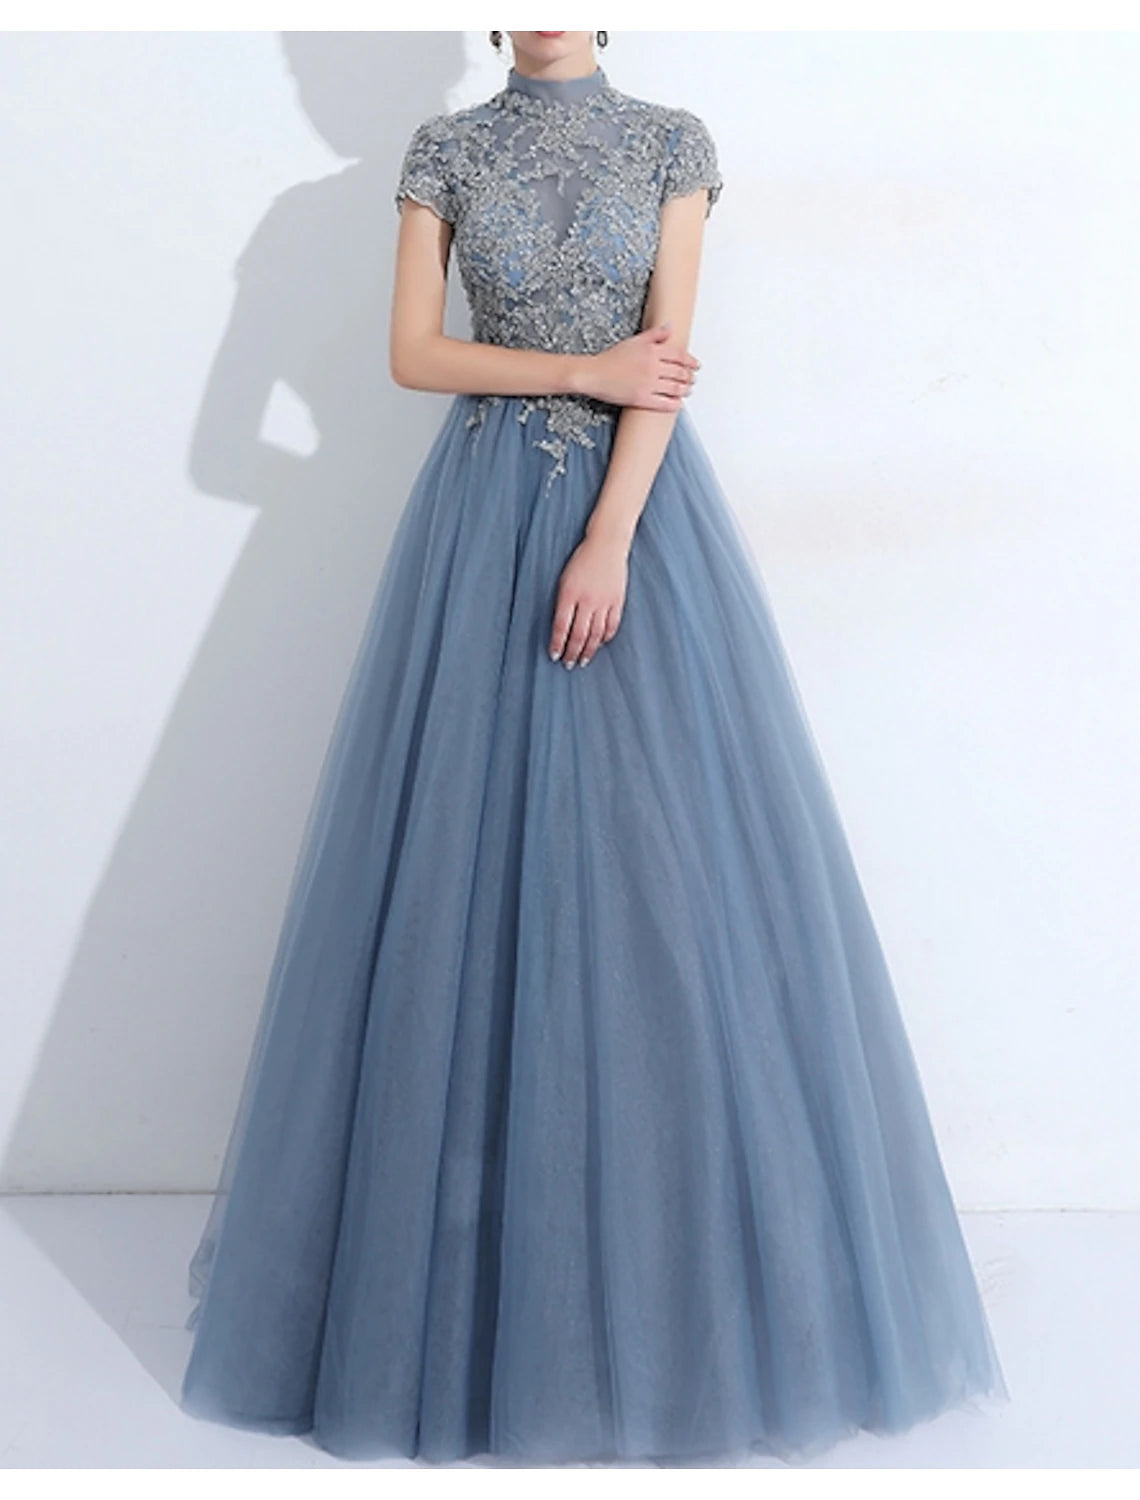 A-Line Evening Gown Elegant Dress Wedding Guest Quinceanera Floor Length Short Sleeve High Neck Tulle with Pleats Appliques